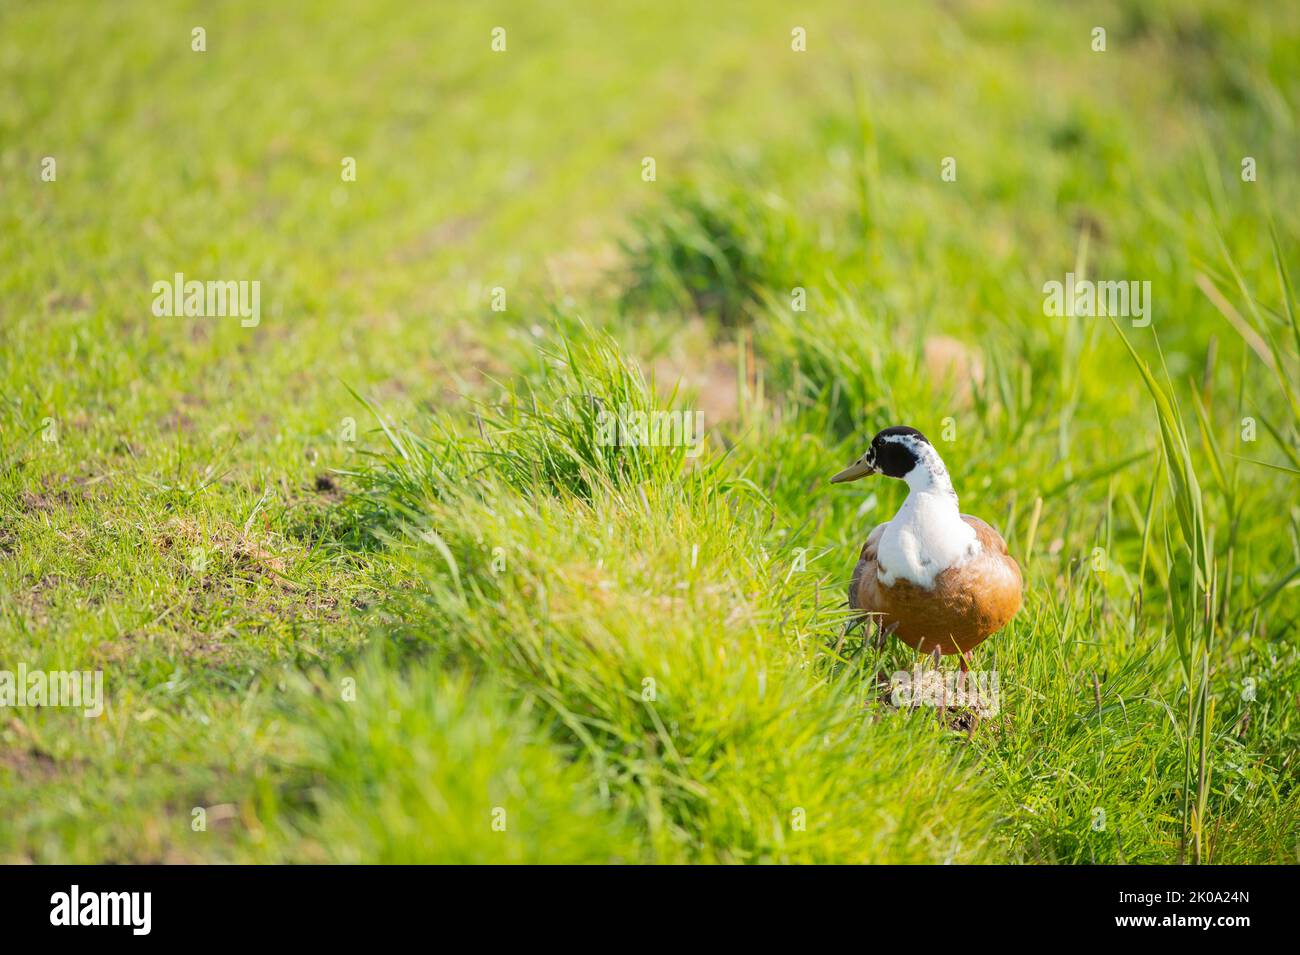 Brown, white and black duck walking in the grass Stock Photo